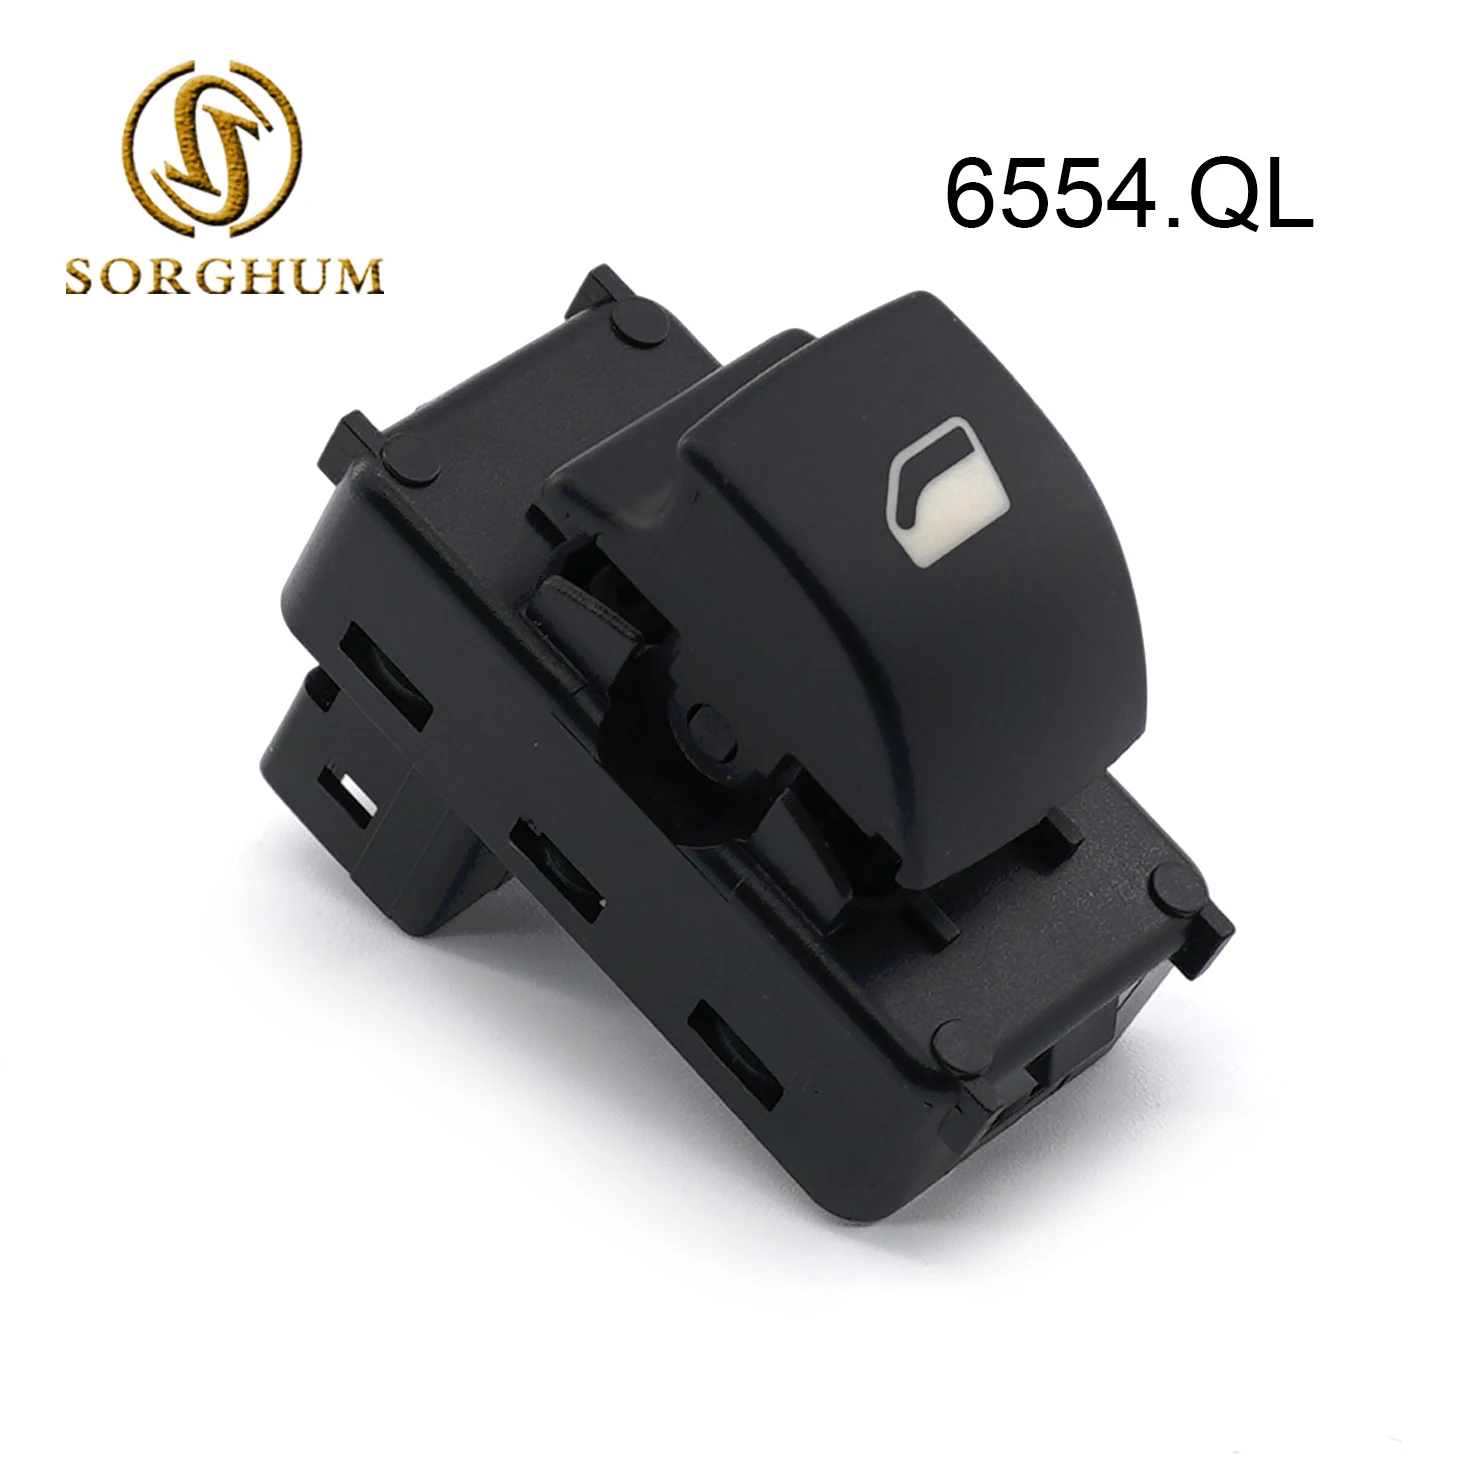 

Sorghum 6554.QL Electric Power Window Control Switch Passenger Lifter Button For Peugeot 207 2007-2017 6554.ZL 6490.HQ 6554.HJ